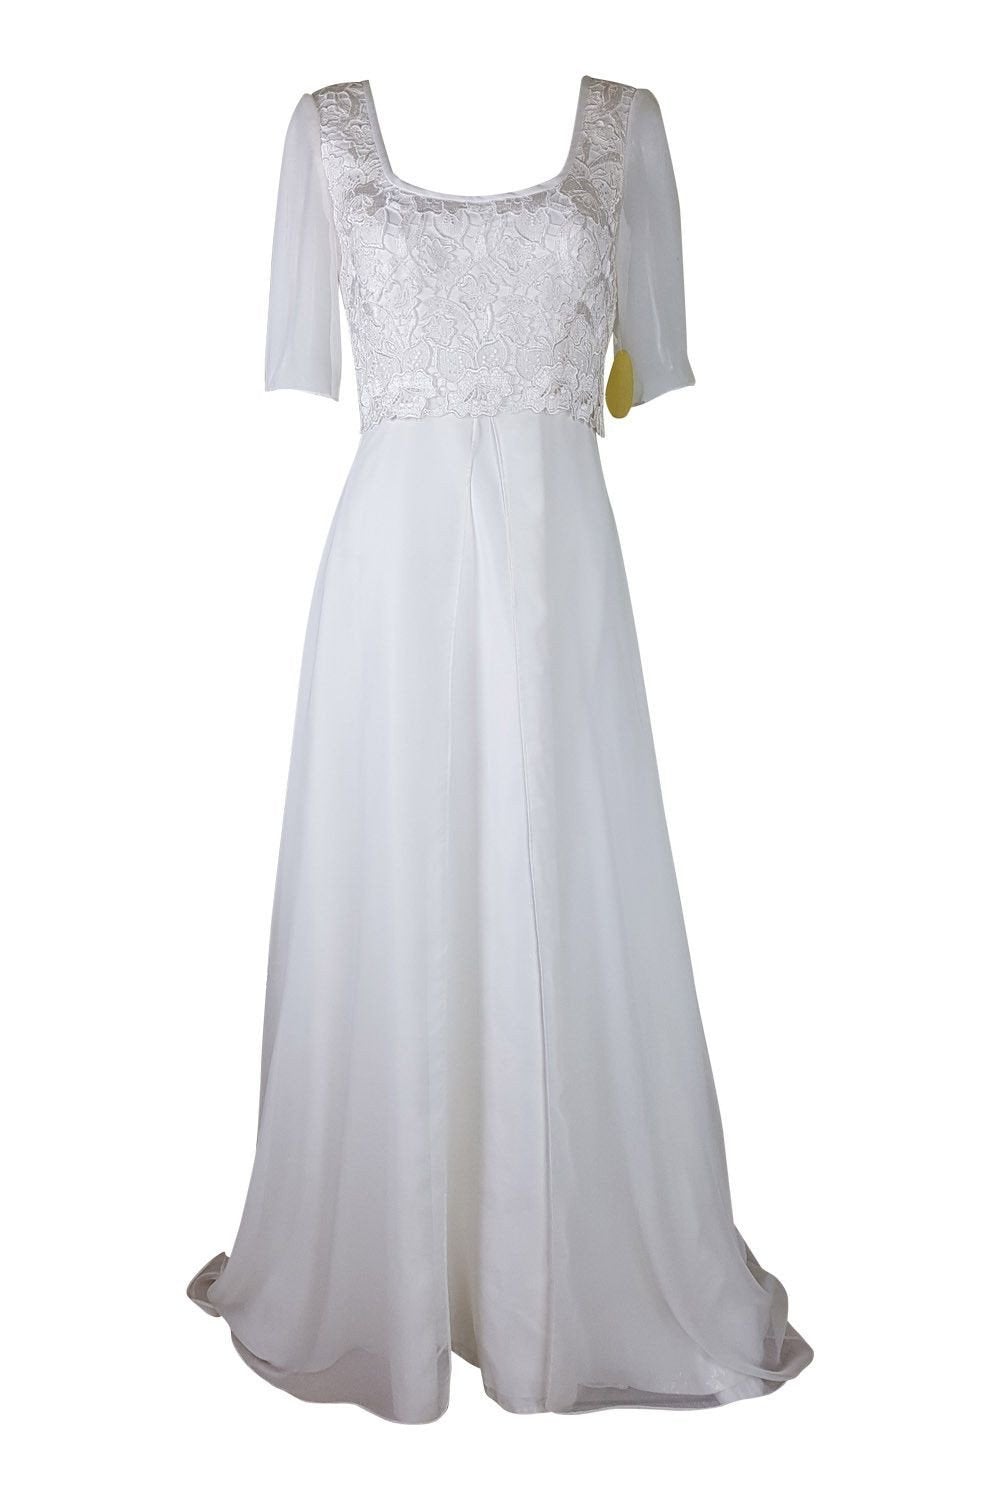 VINTAGE STYLE Demure Wedding Dress (S)-The Freperie-The Freperie